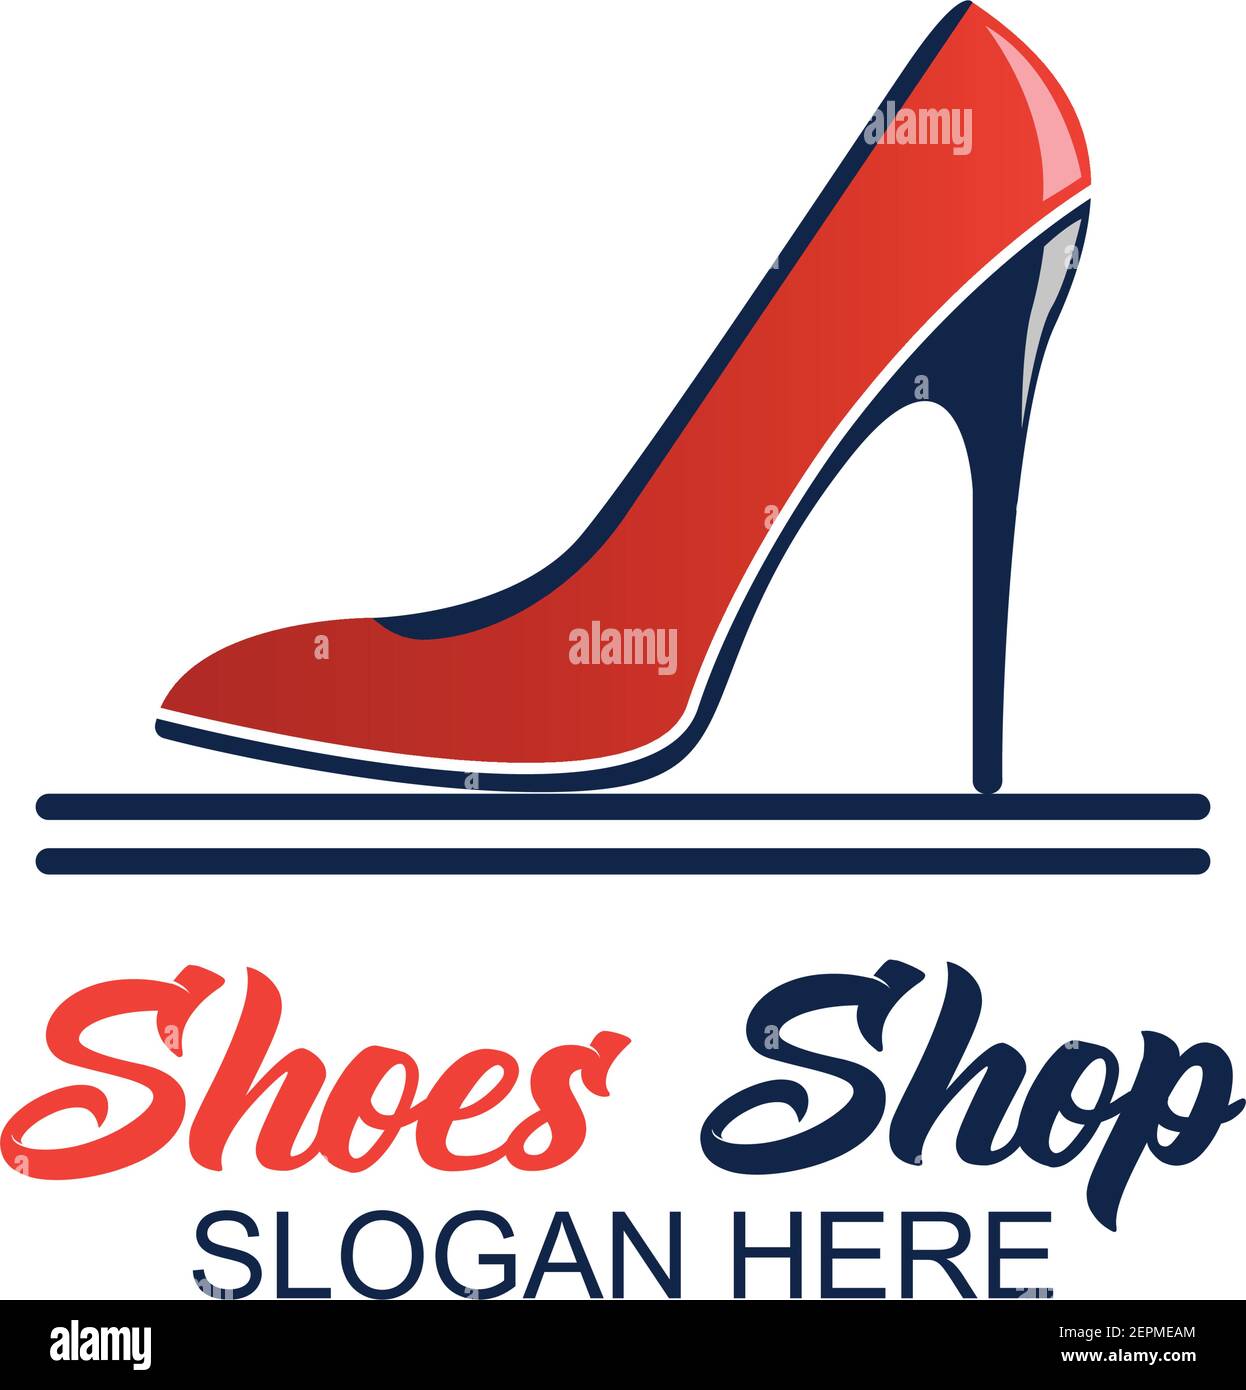 183+ Catchy Slogan For Shoes To Attract Others - Slogify